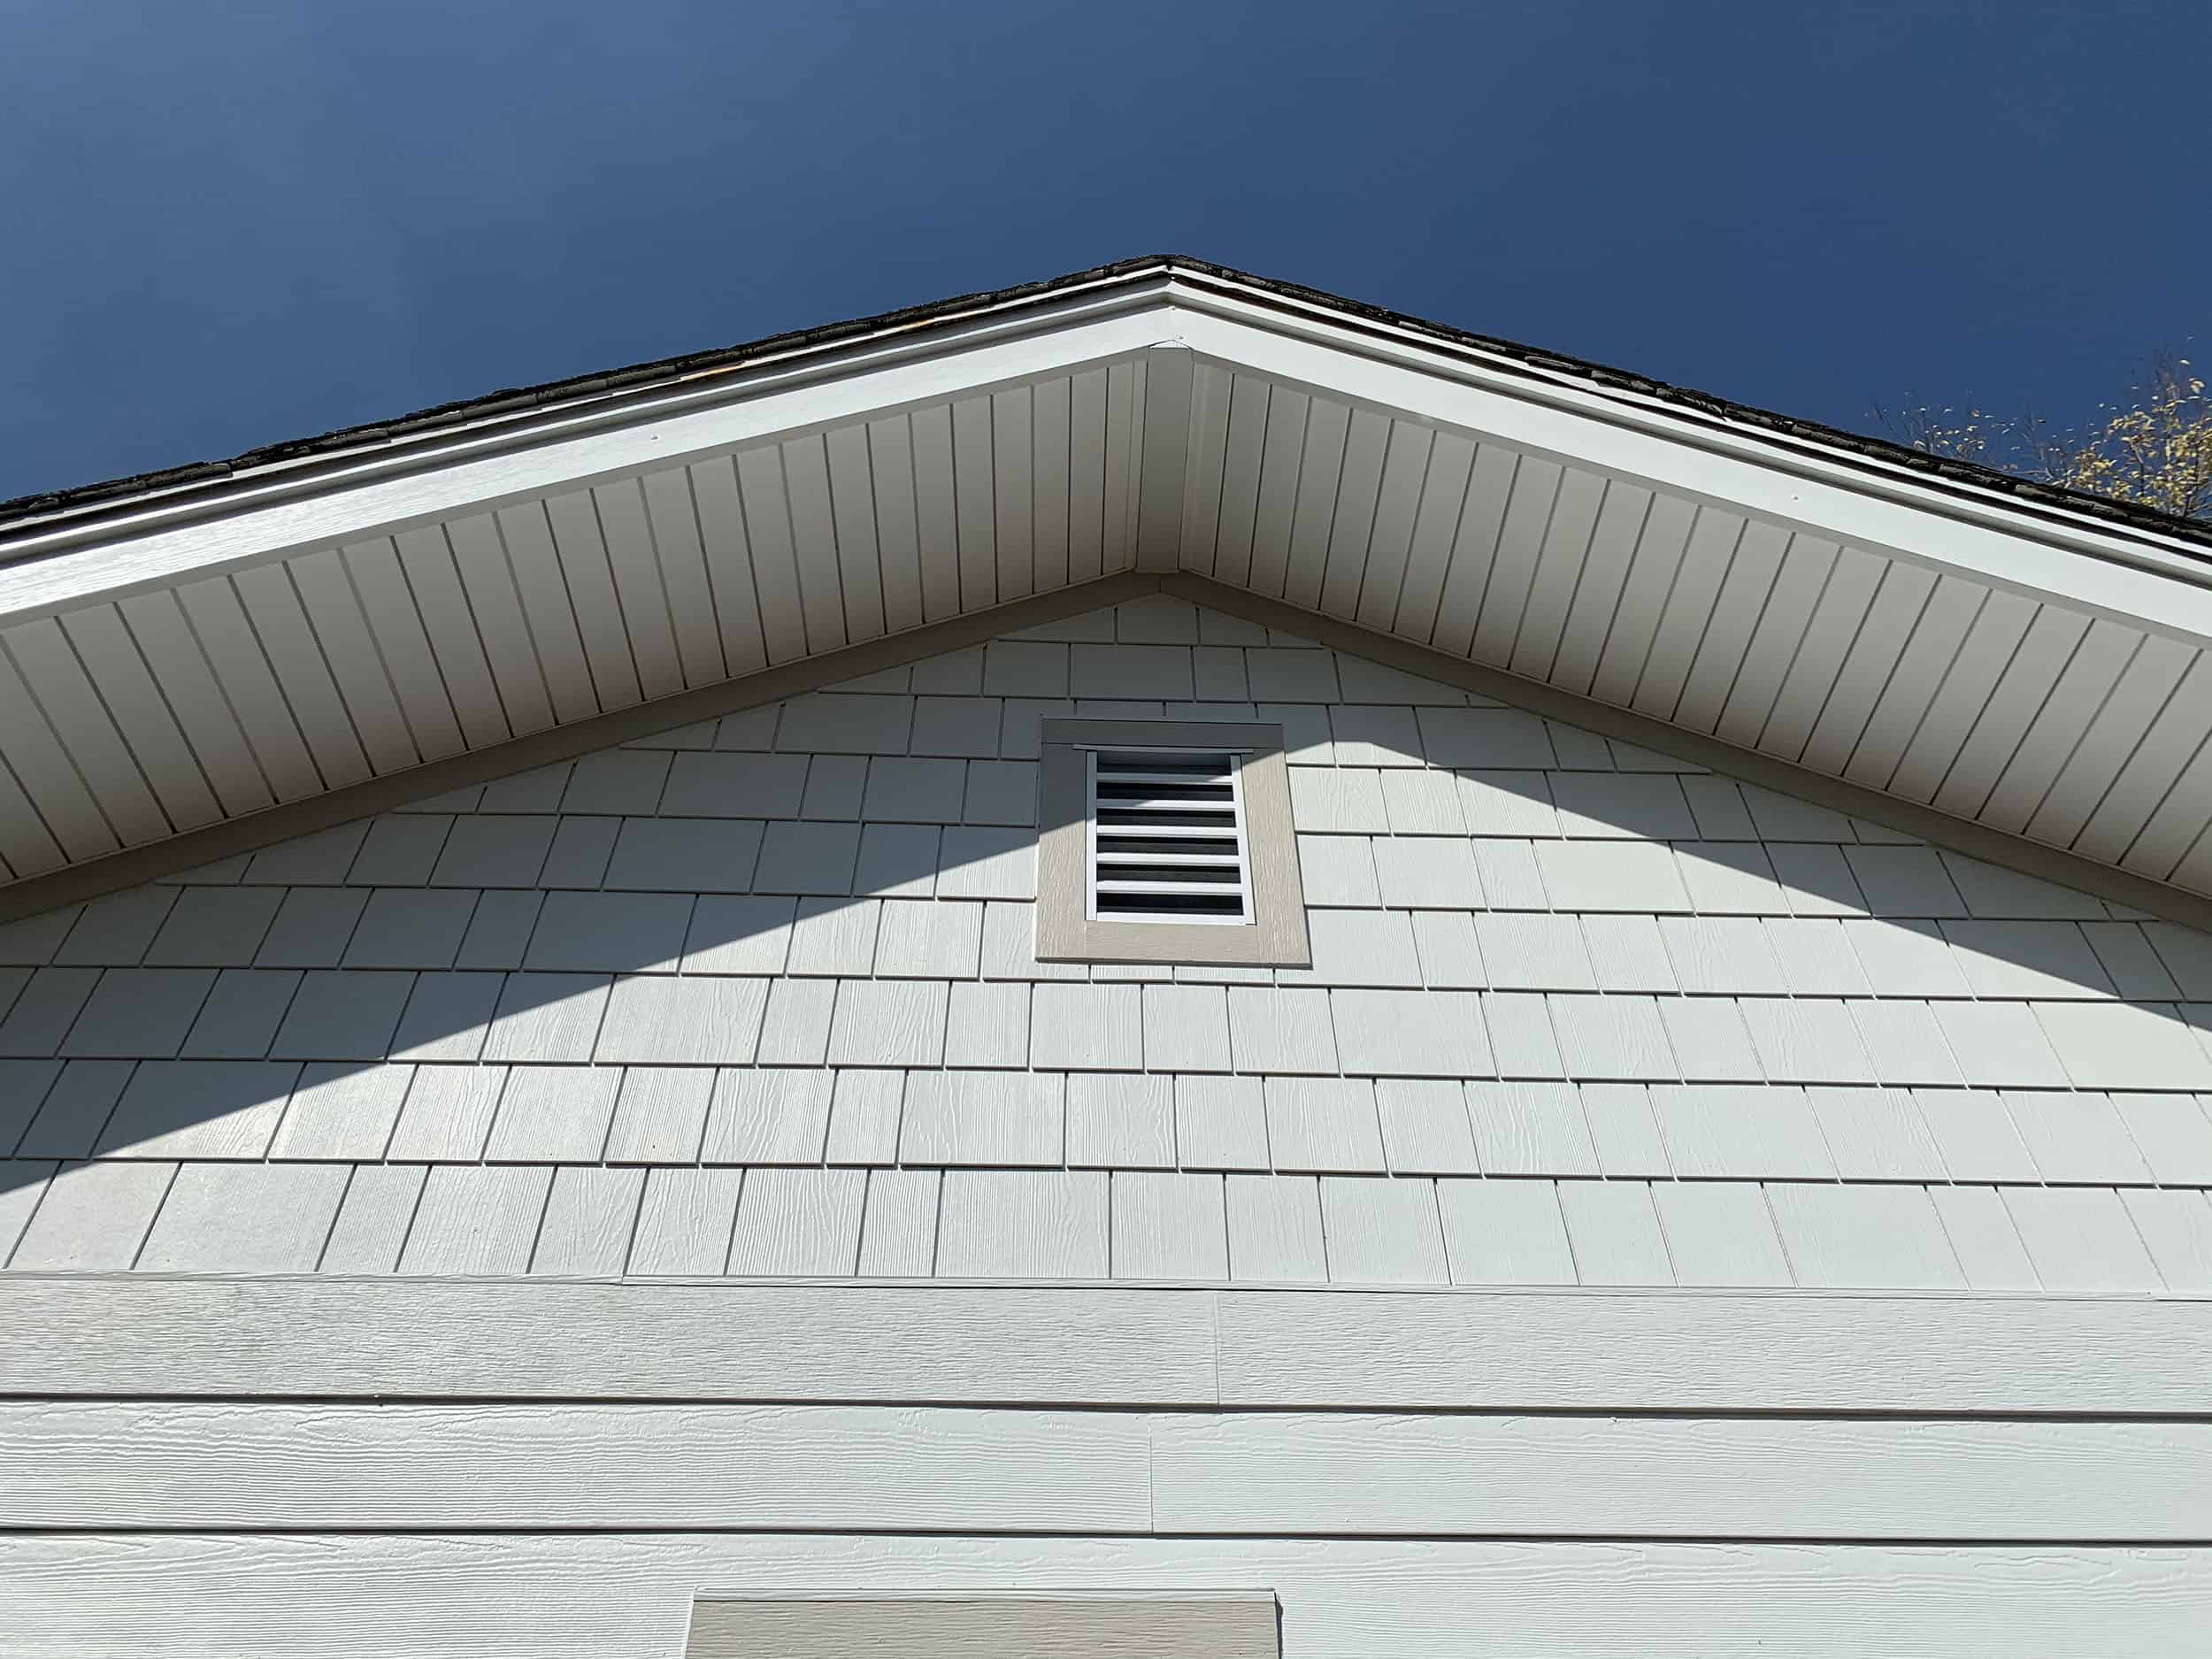 4 Things to Remember When Considering New Siding Materials